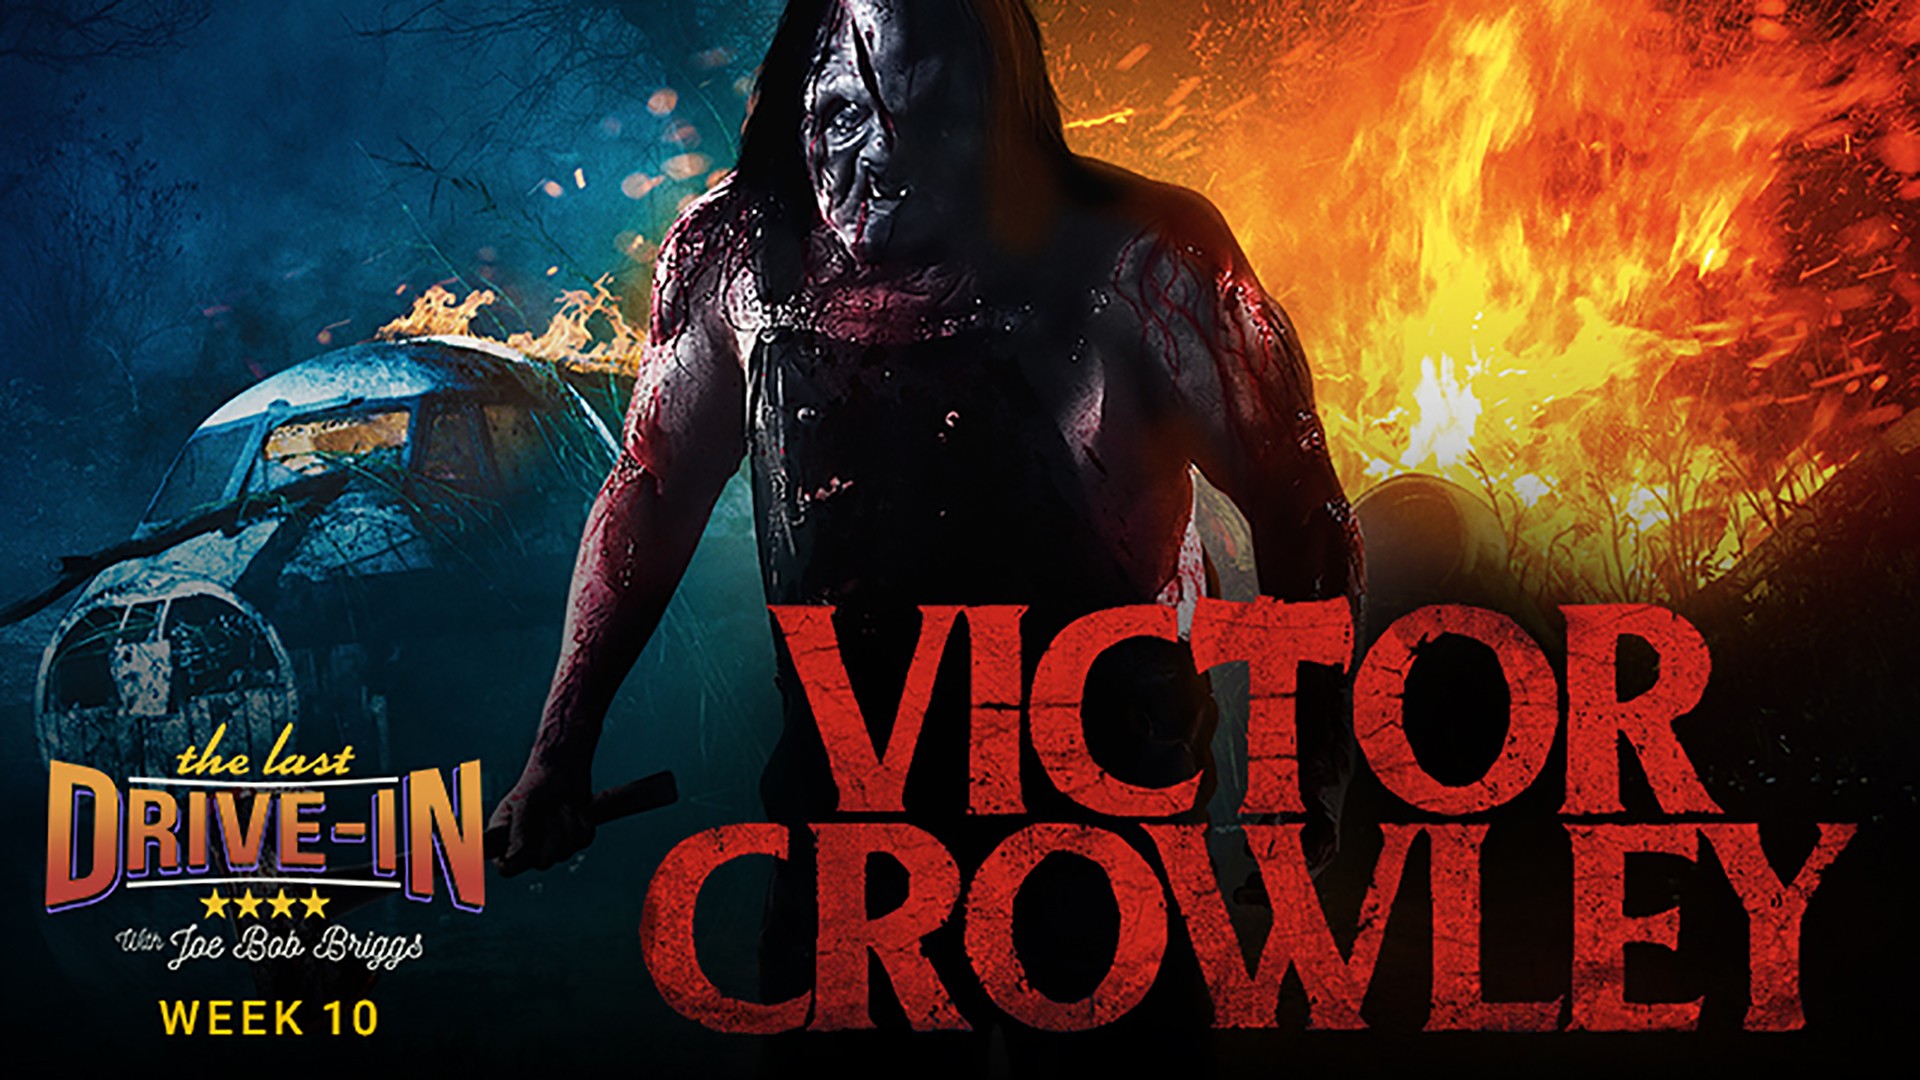 Week 10: Victor Crowley, Ten years after the events of the original movie, Victor Crowley is mistakenly resurrected and kills once more., TV-MA, Season 1028422, Episode 20